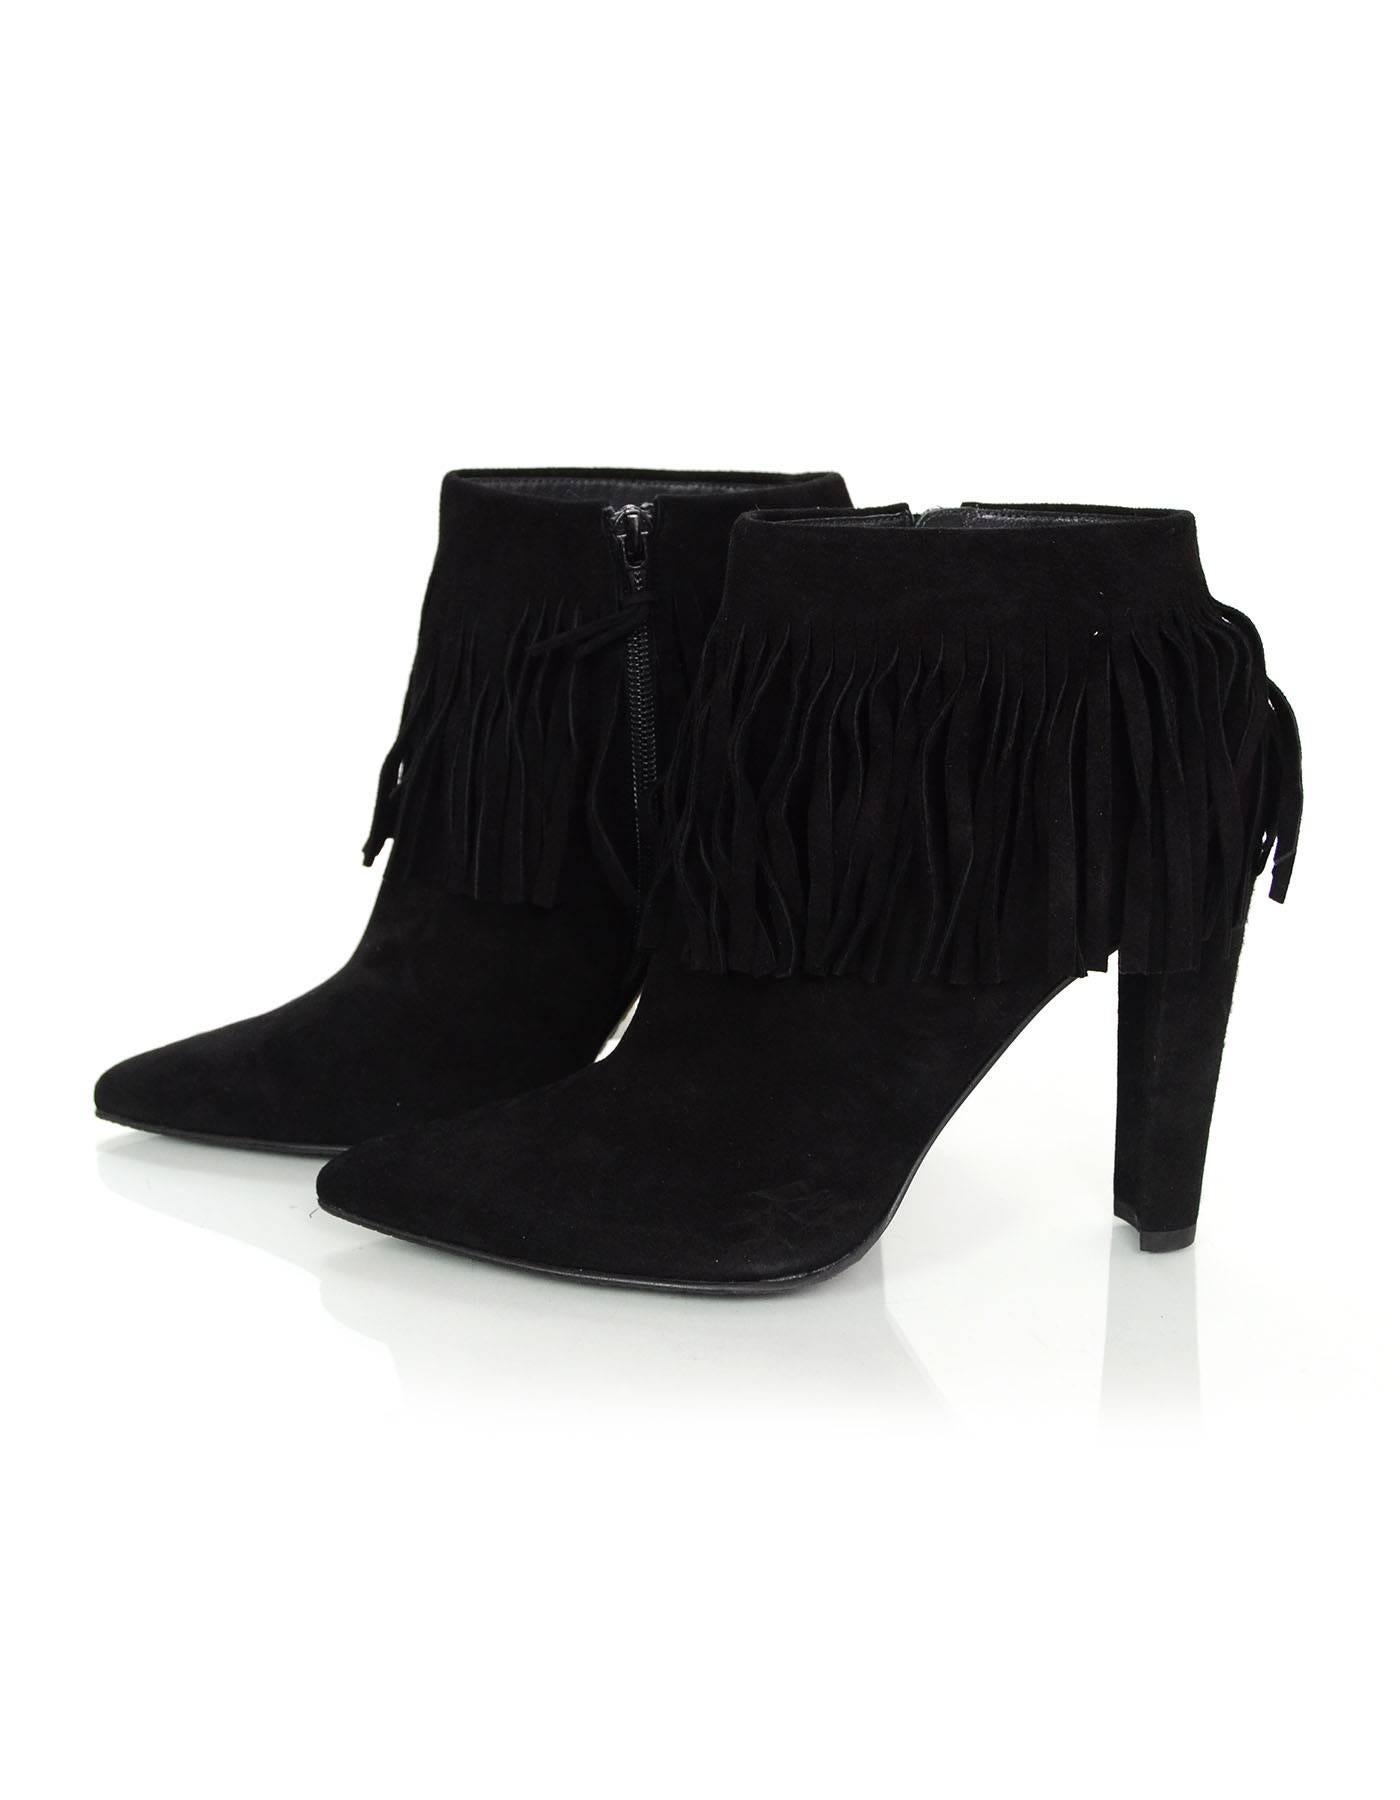 100% Authentic Stuart Weitzman "Fringetimes" Black Bootie. Features black fringe, pointed toe, curved heel, rubber sole and inside zipper.

Made In: Spain
Color: Black
Materials: Suede and rubber
Closure/Opening: Inside ankle zipper
Sole